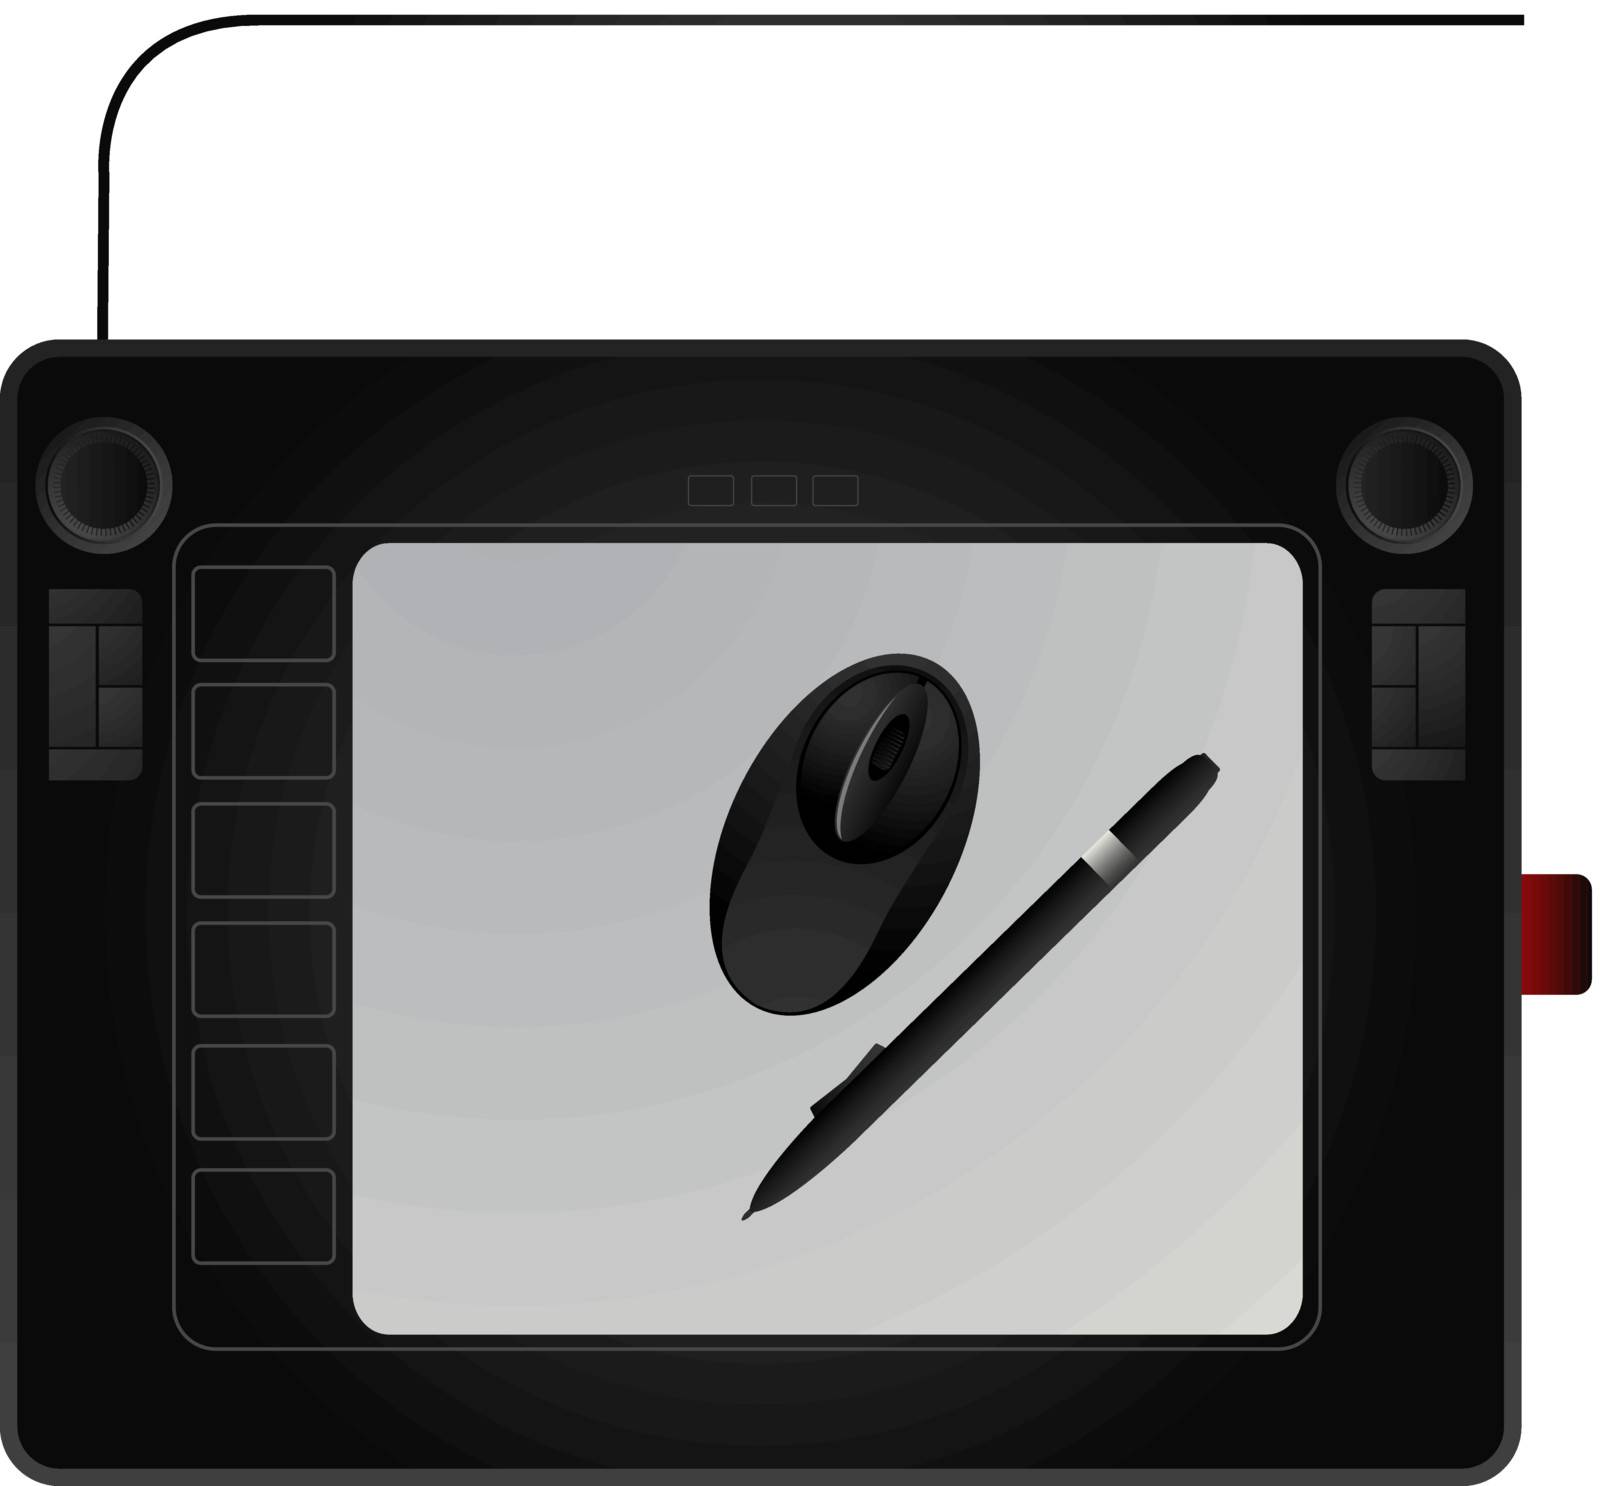 Graphic tablet by Lirch